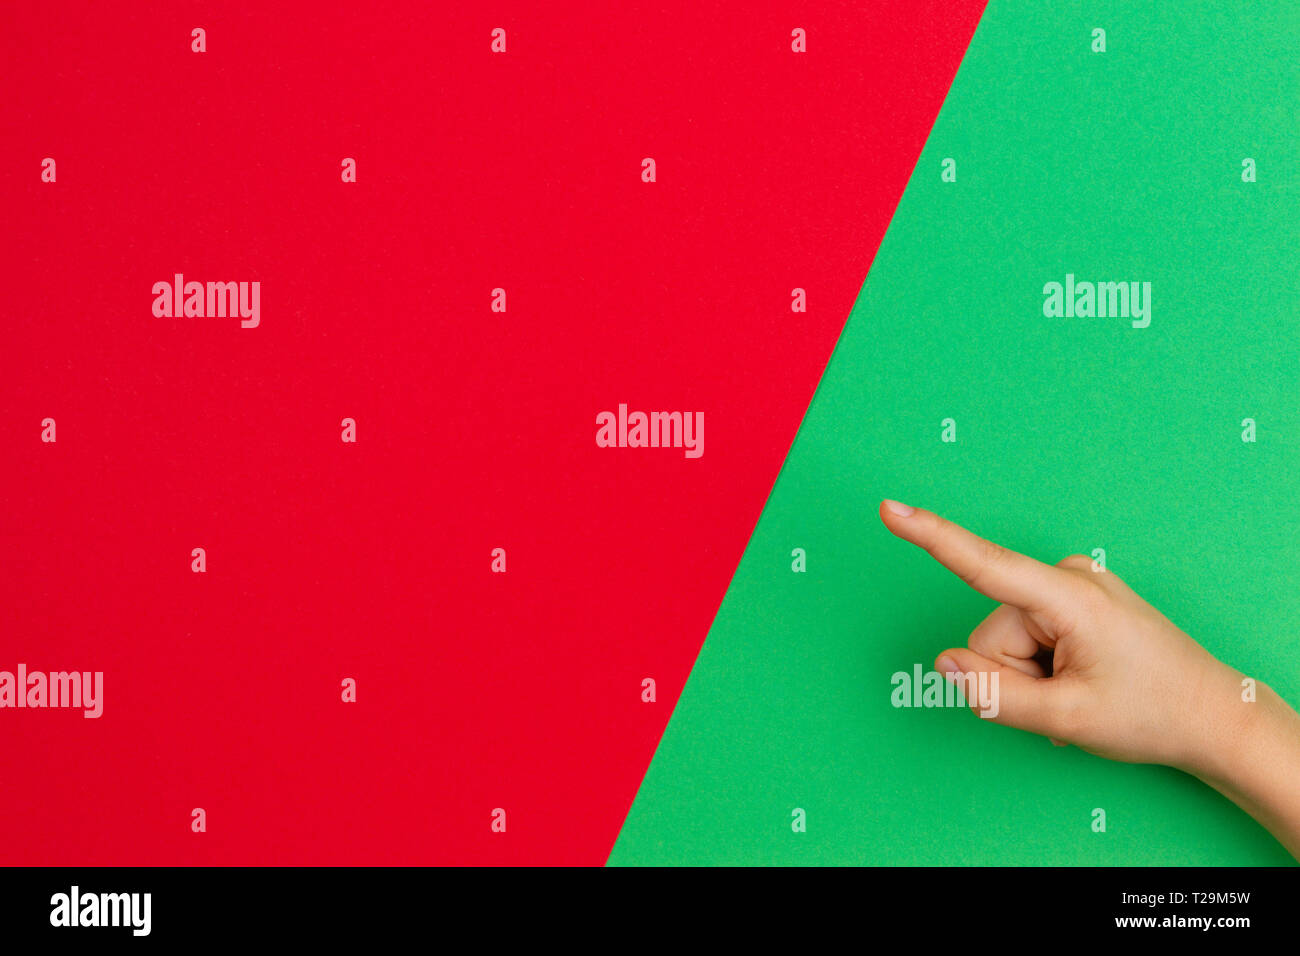 Hand pointing a finger on green and red color background Stock Photo